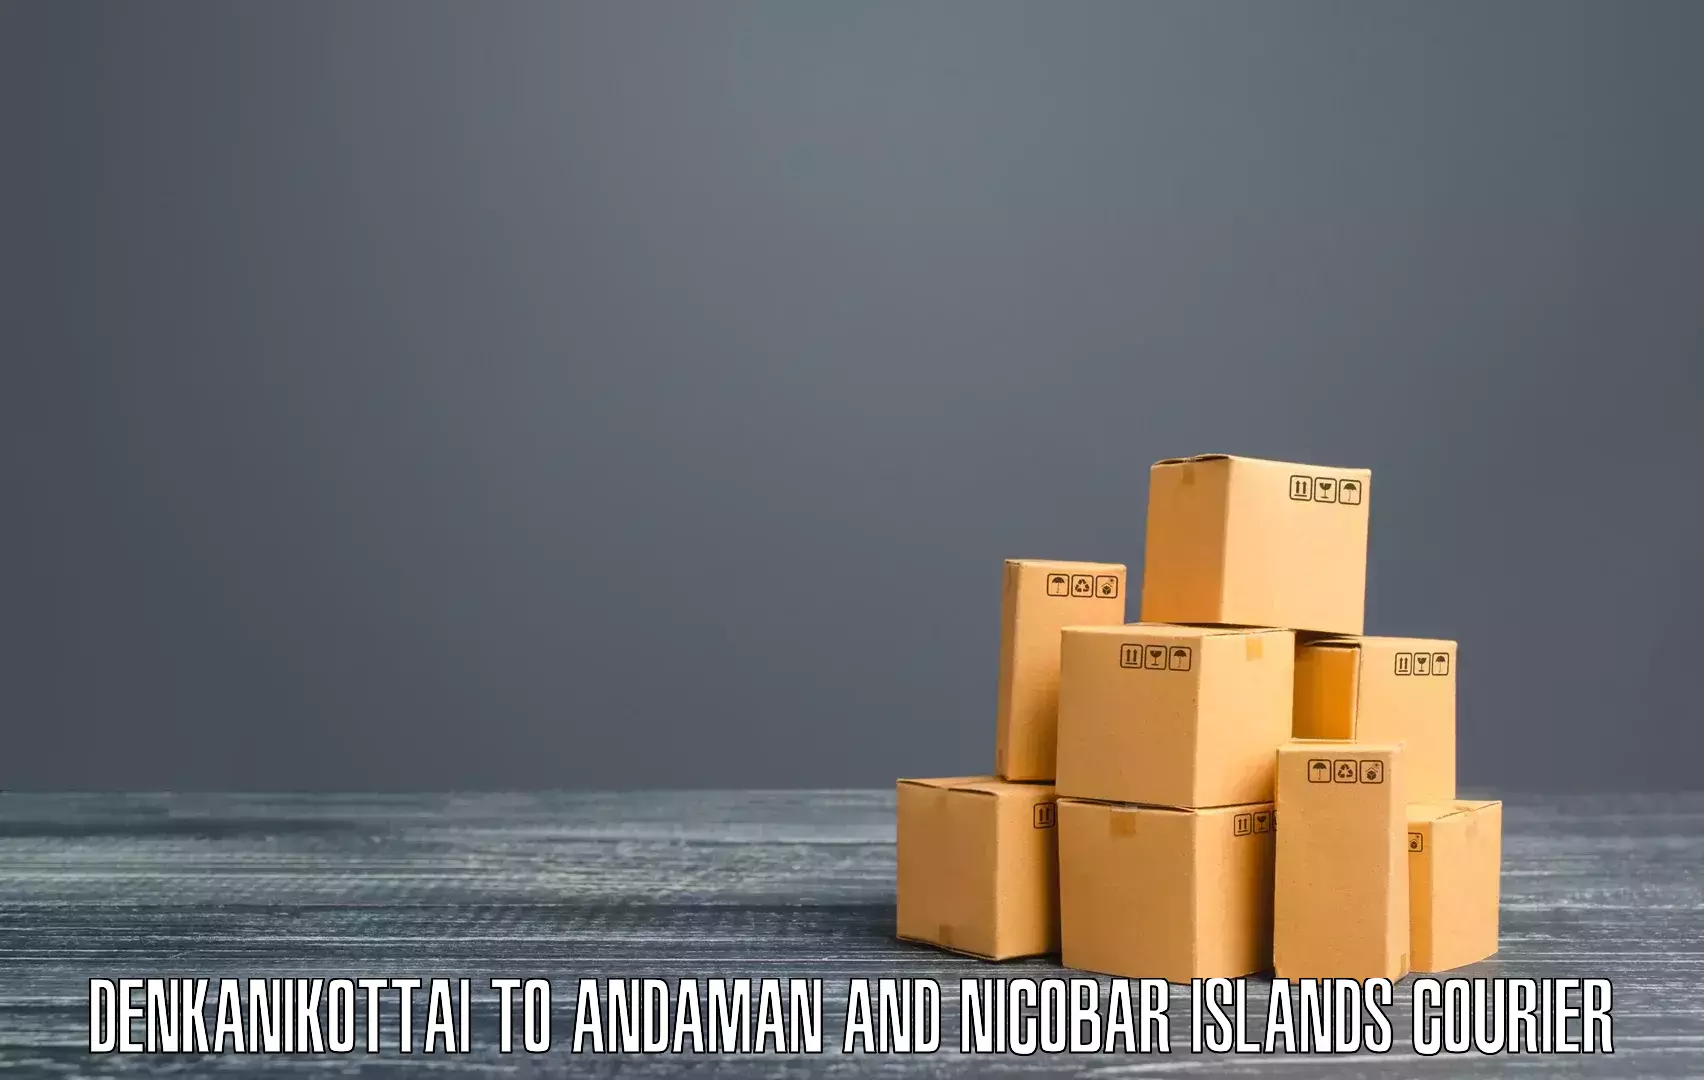 High-speed parcel service Denkanikottai to North And Middle Andaman